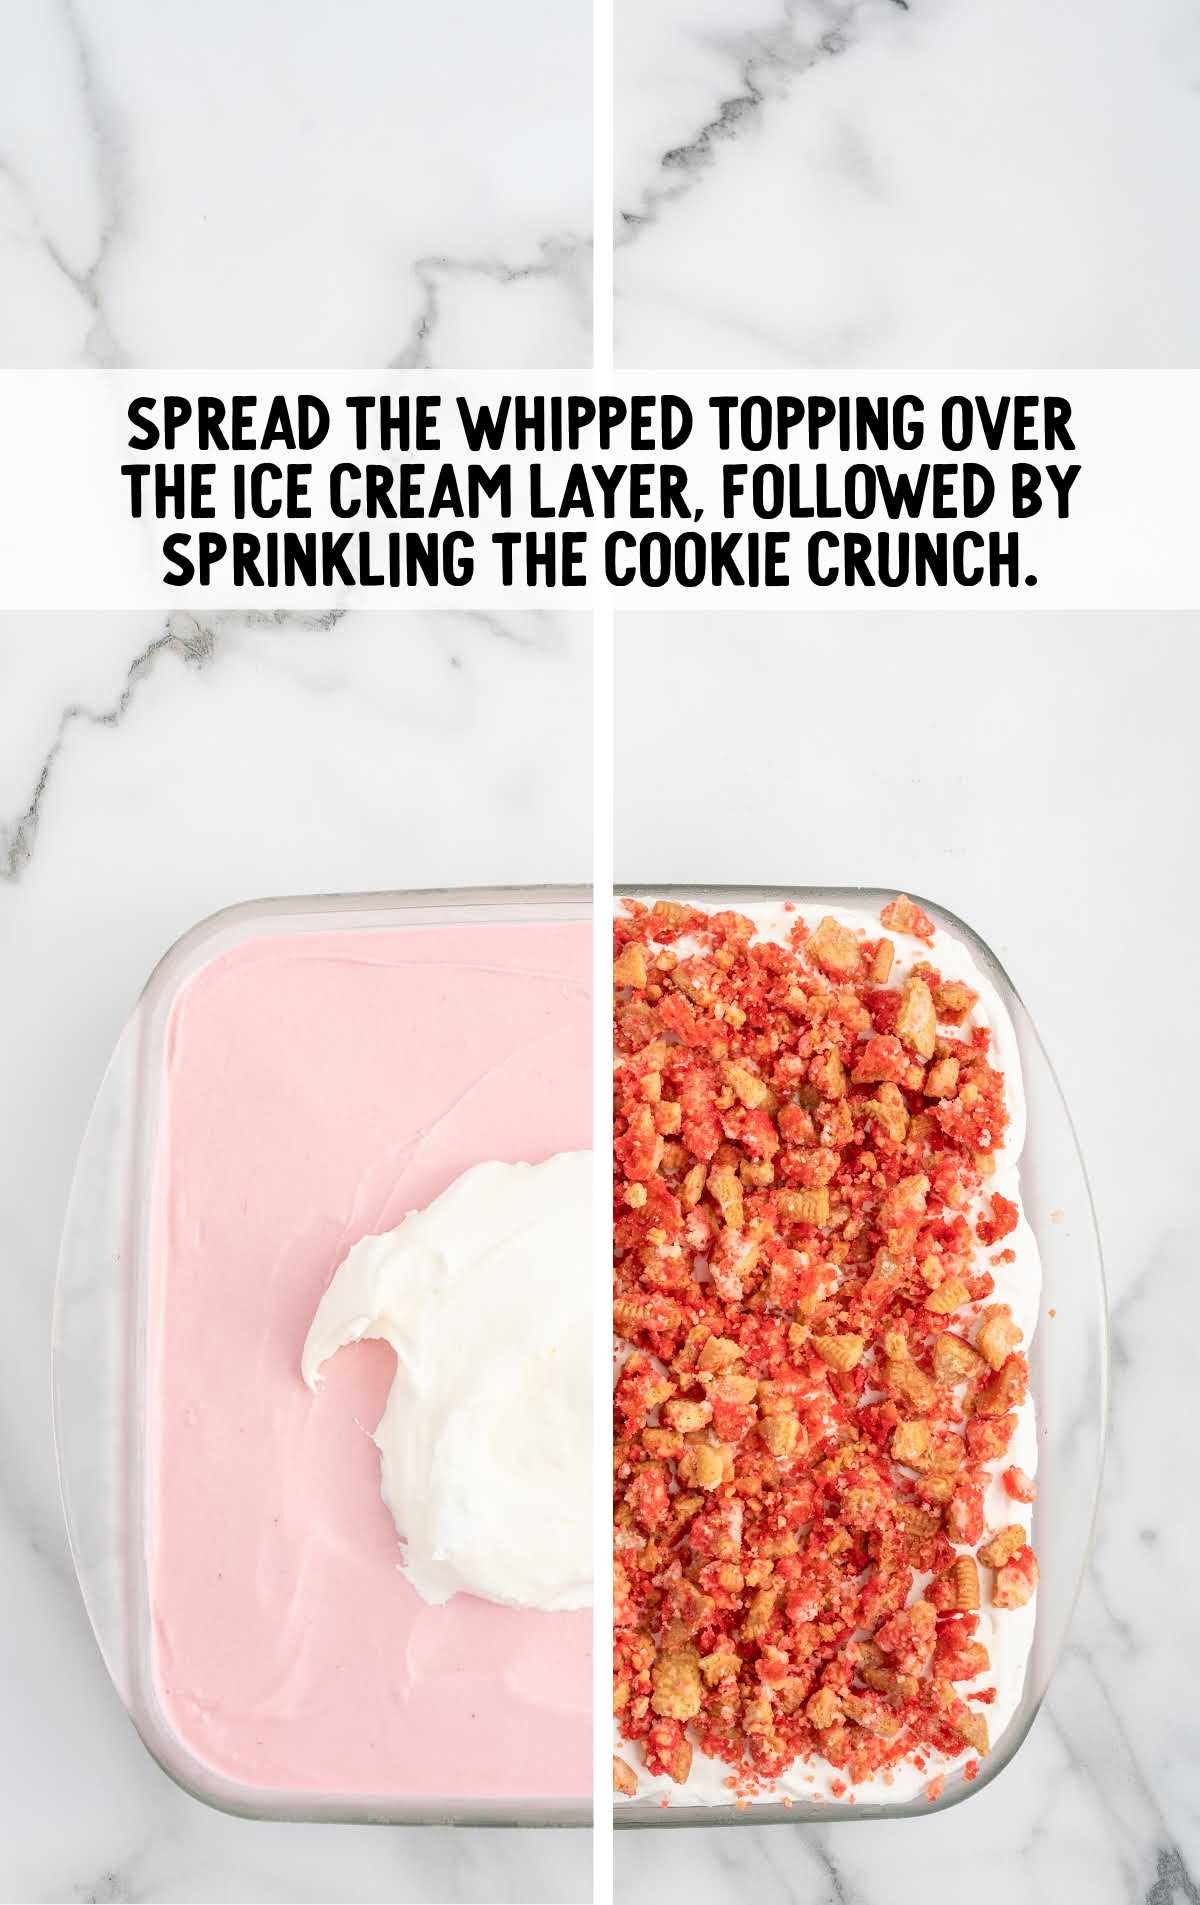 whipped topping spread over the ice cream layer